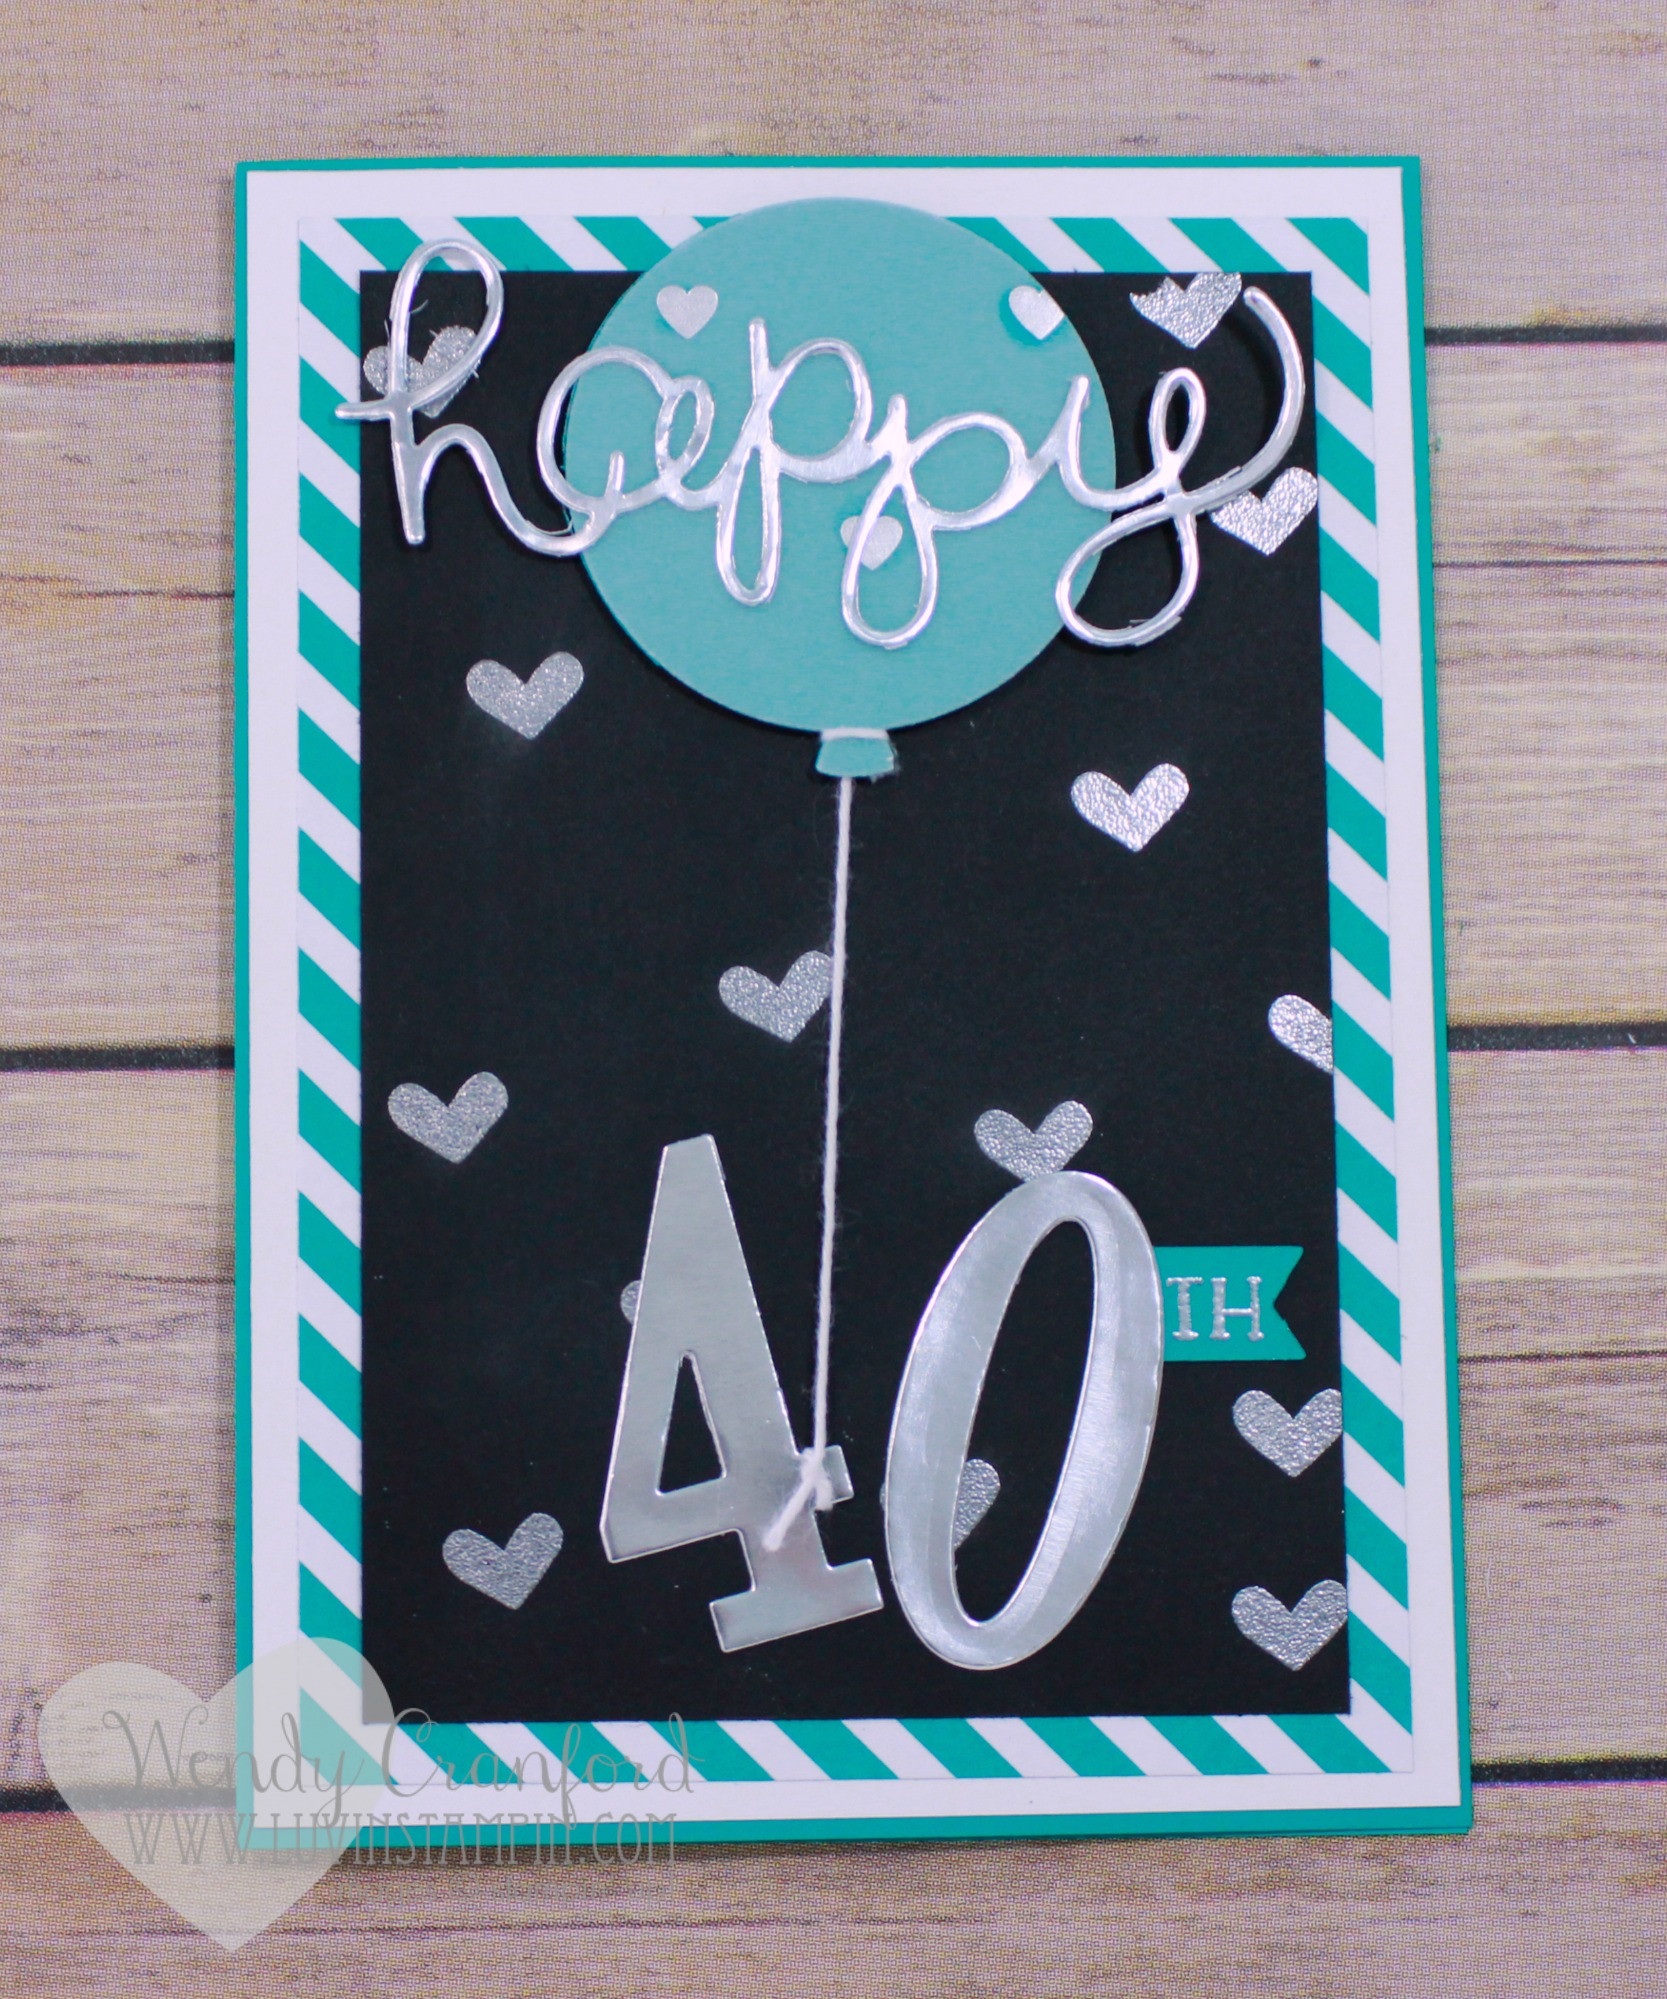 40th Birthday Card
 The Big 40 Birthday Card For Monterey Amy Luvin Stampin